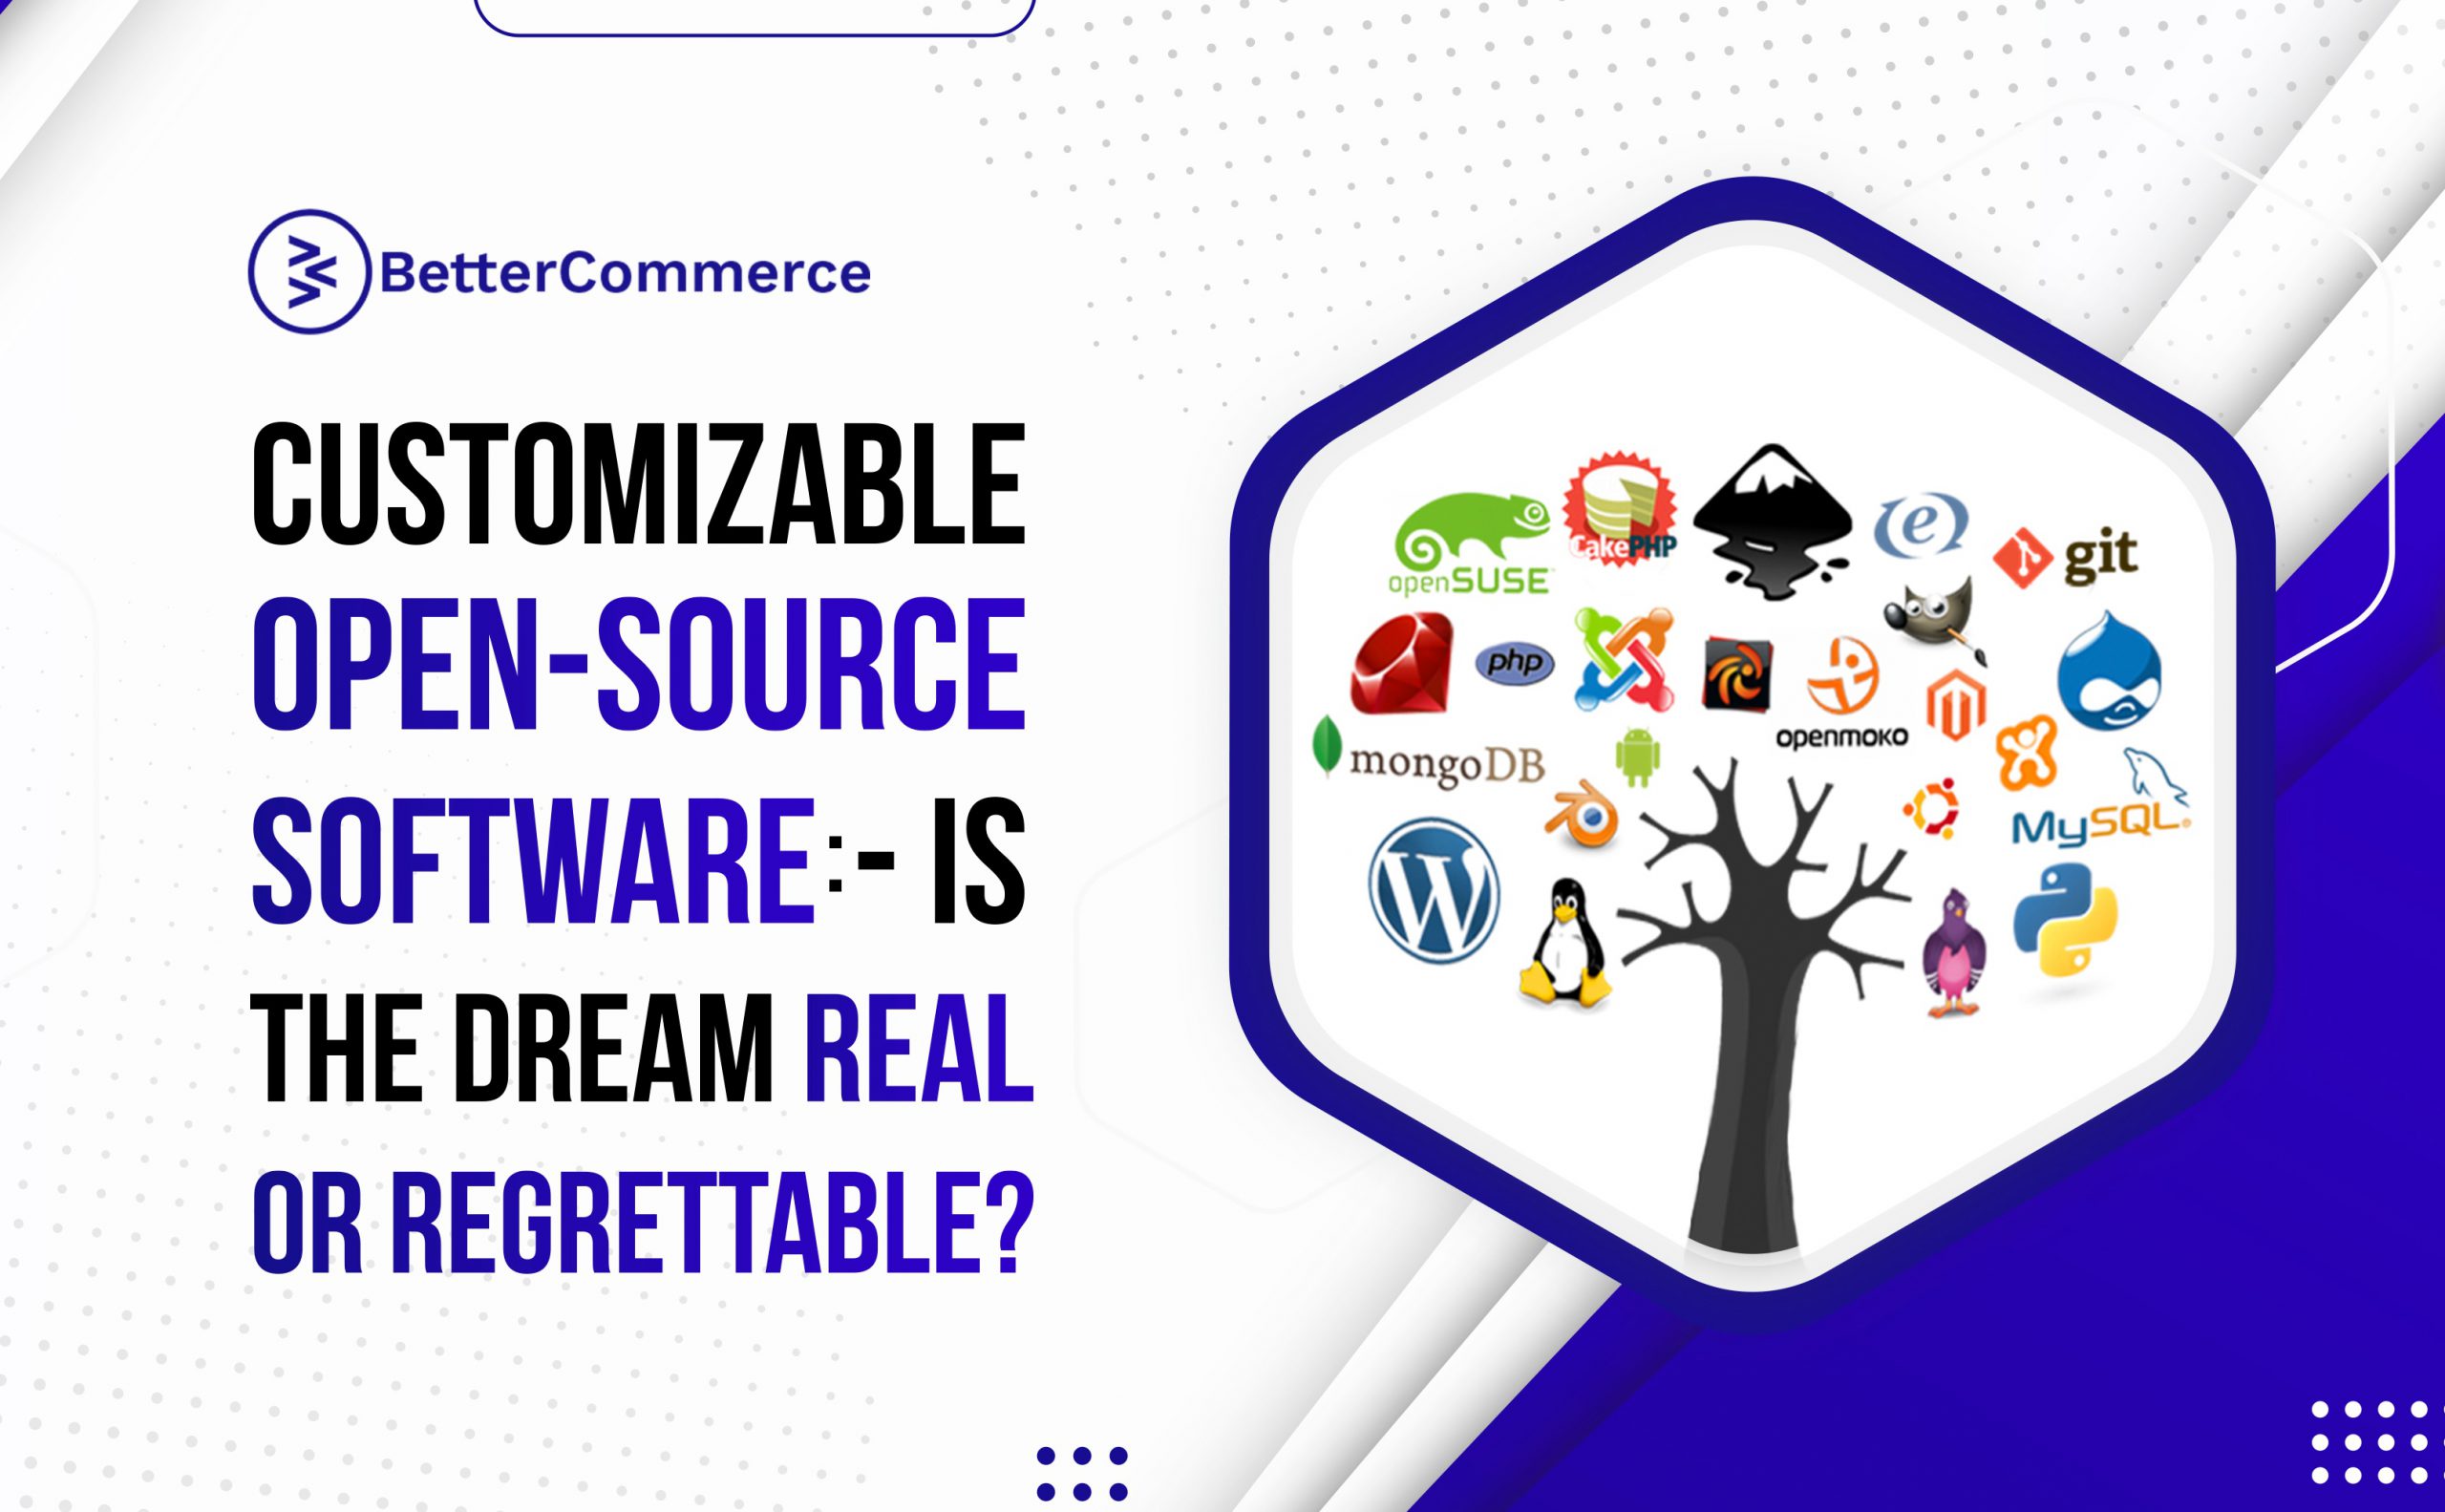 Customizable Open-Source Software:- Is the Dream Real or Regrettable?